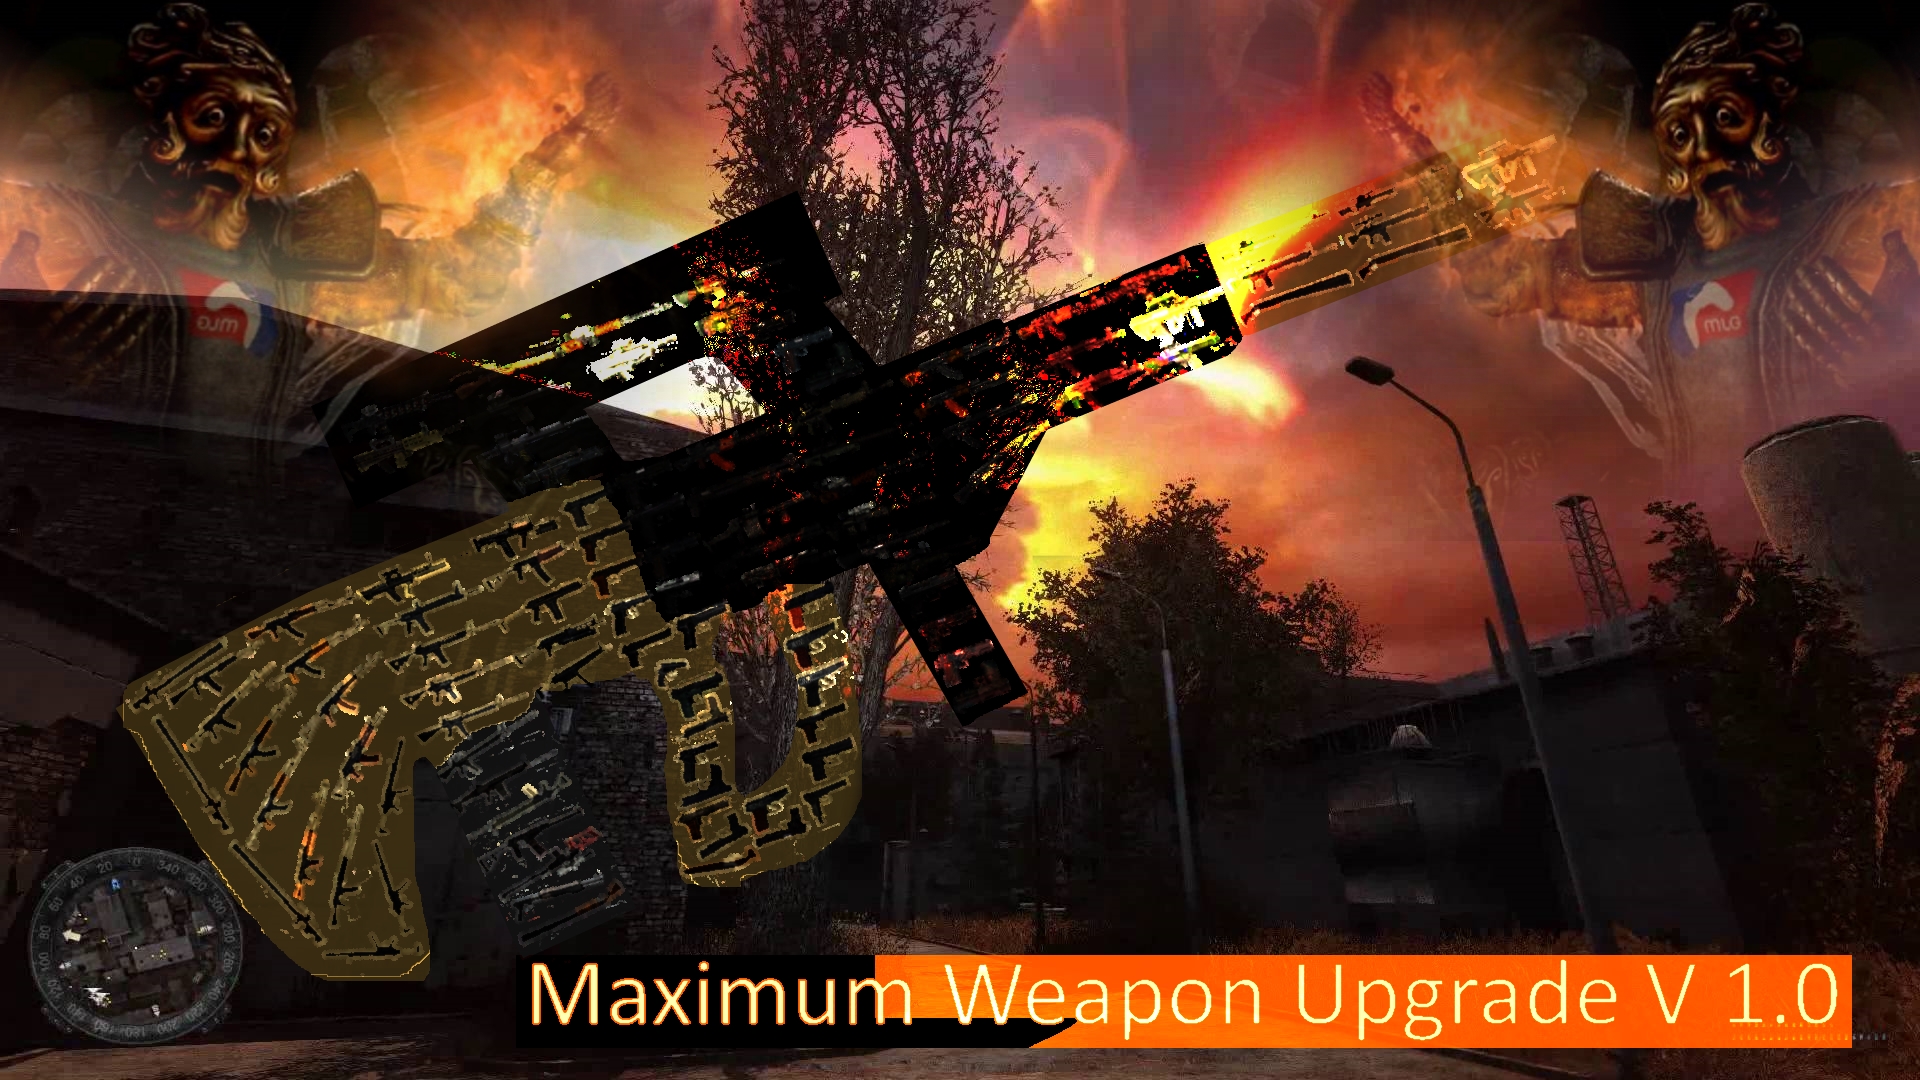 Steam Community :: Screenshot :: All weapons maxed out